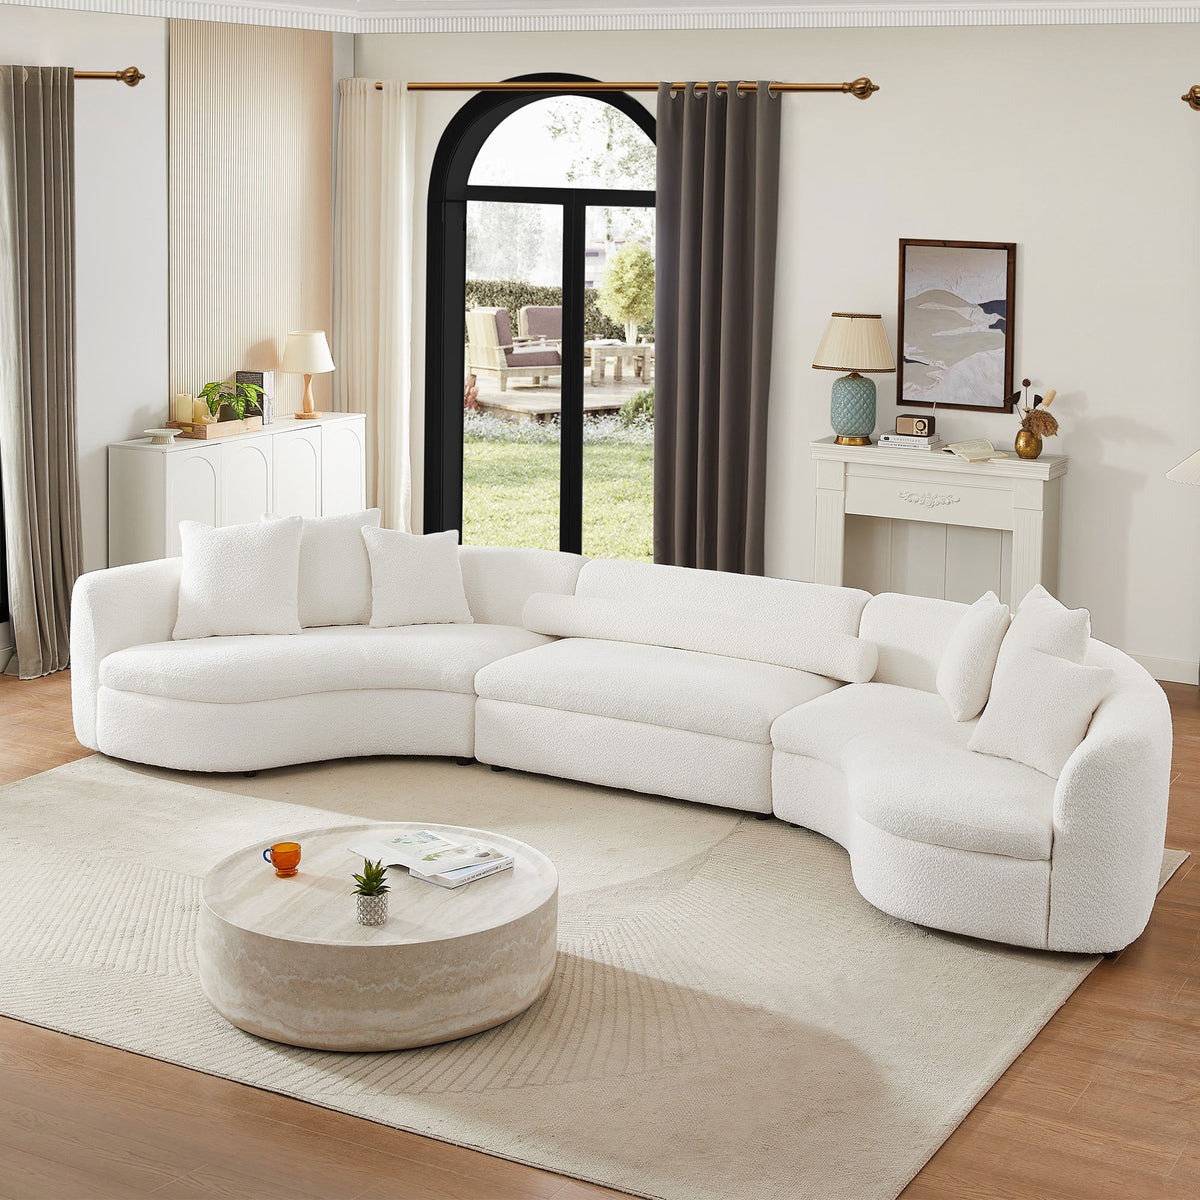 Oversized Modern 3 Pieces Upholstered Sofa Ultimate Comfort 6-8 Seater Couches for Living Room, Office WHITE